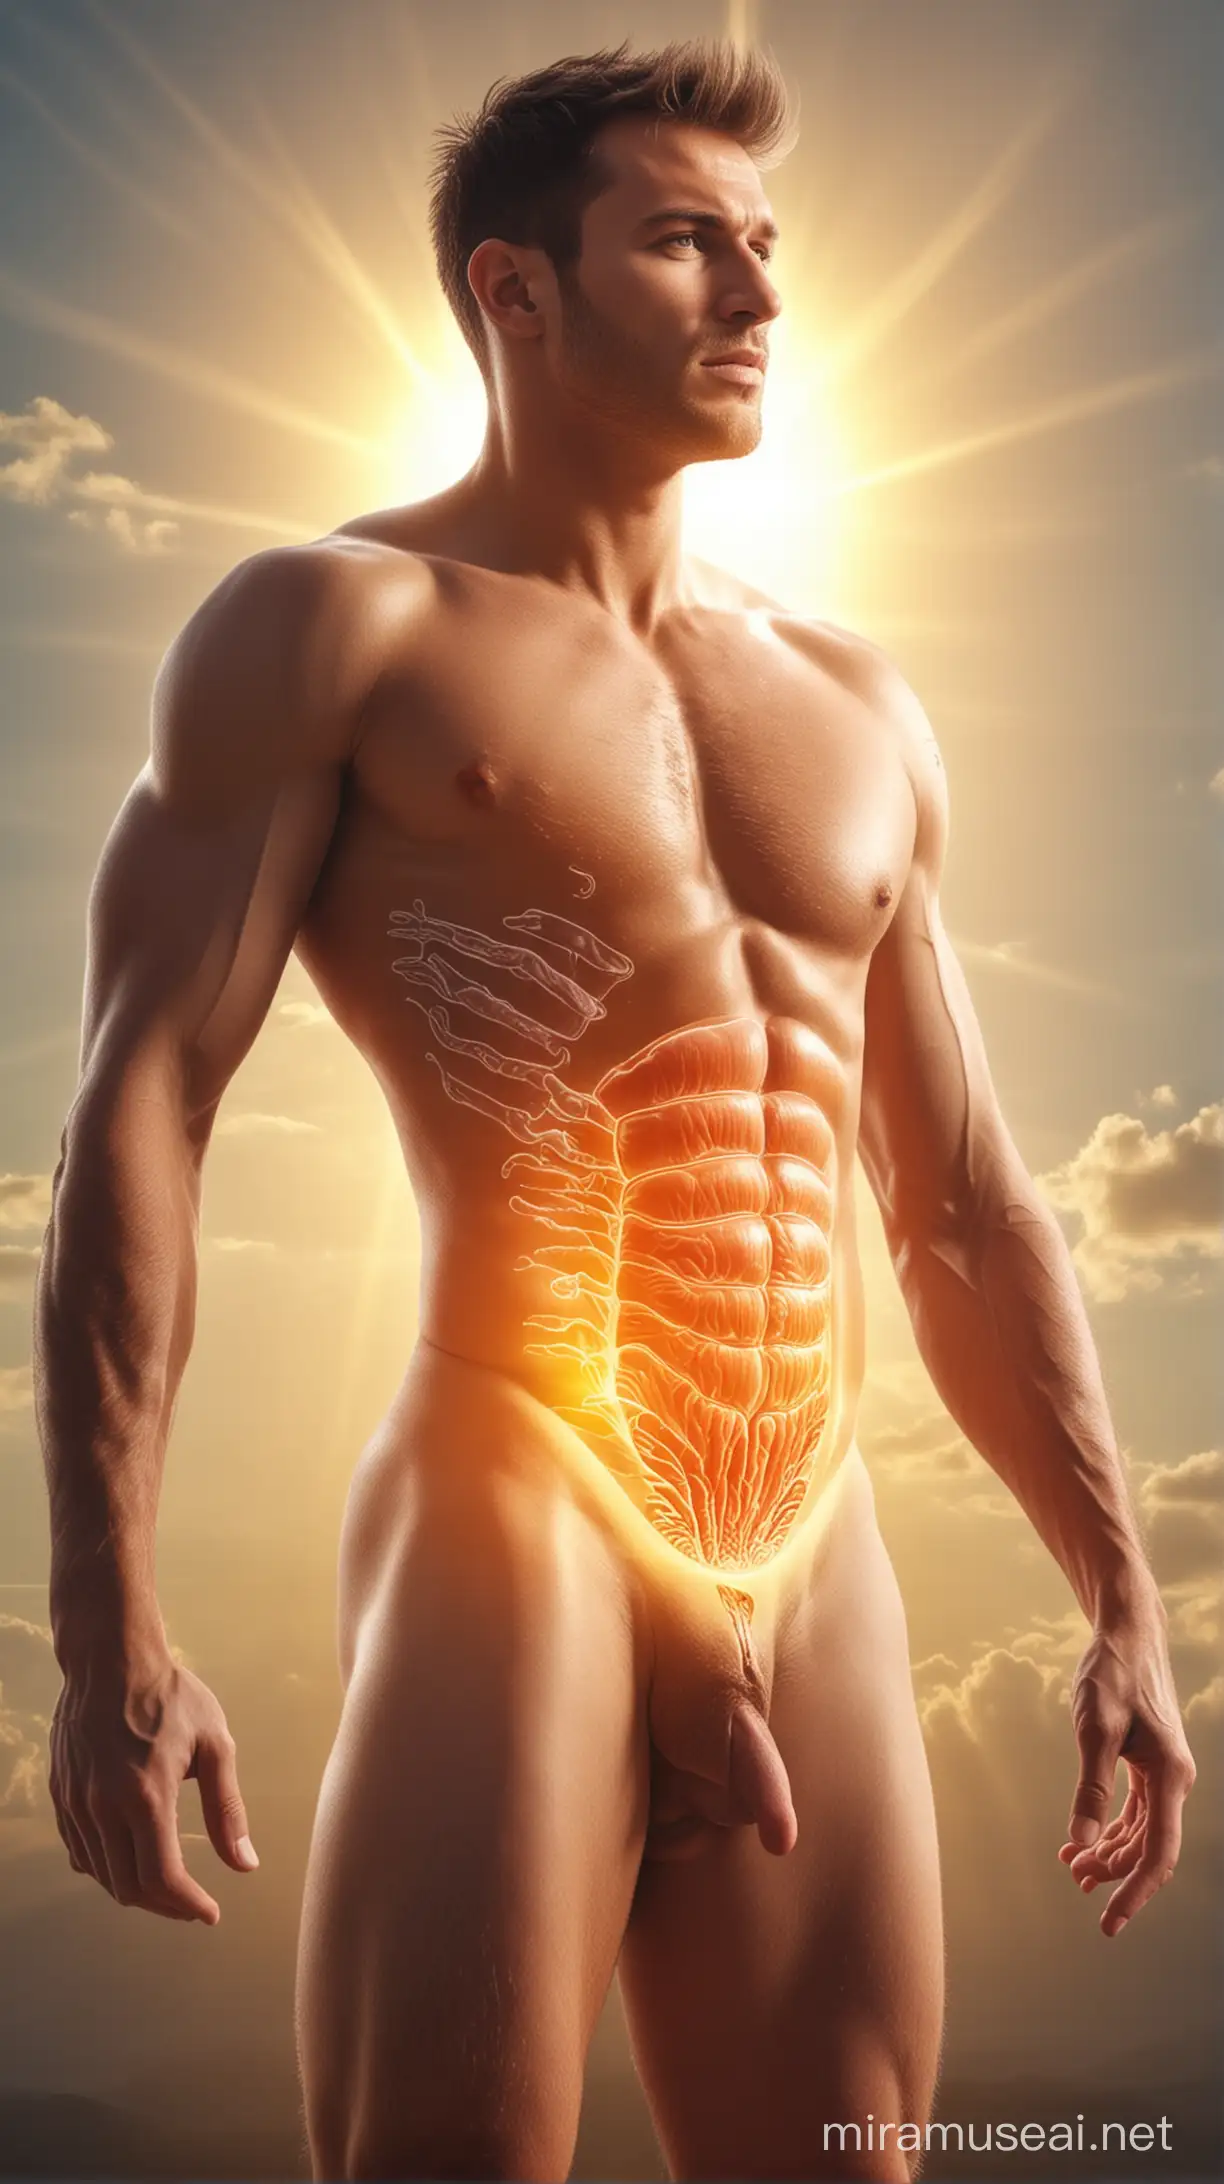 Digestion diagram in  men body, natural background, sun light effect, 4k, HDR, morning time weather